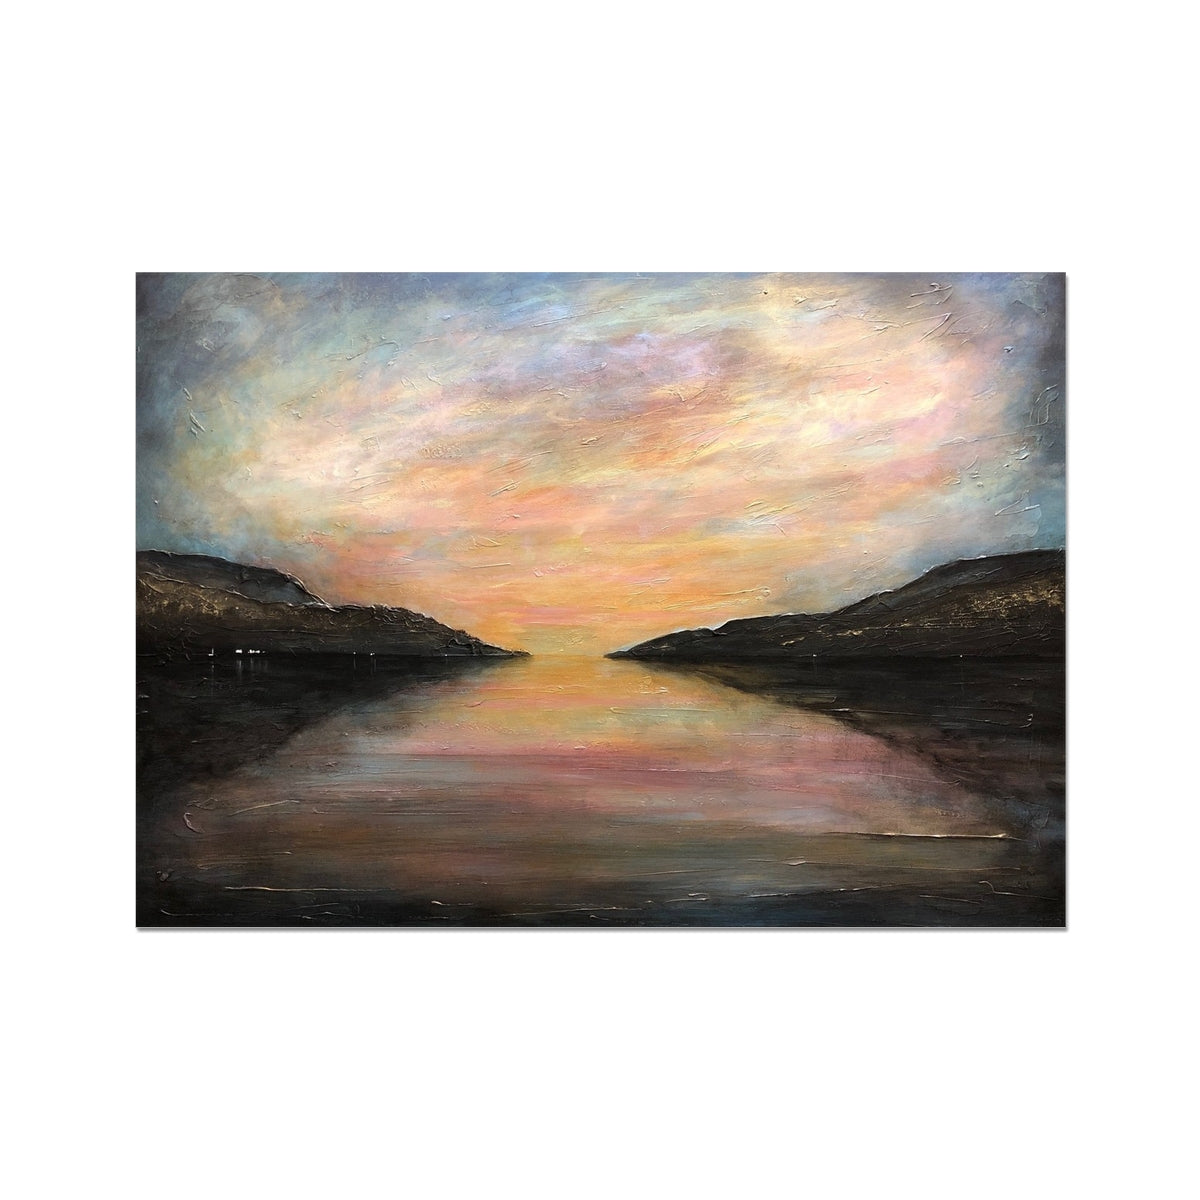 Loch Ness Glow Painting | Fine Art Prints From Scotland-Fine art-Scottish Lochs & Mountains Art Gallery-A2 Landscape-Paintings, Prints, Homeware, Art Gifts From Scotland By Scottish Artist Kevin Hunter